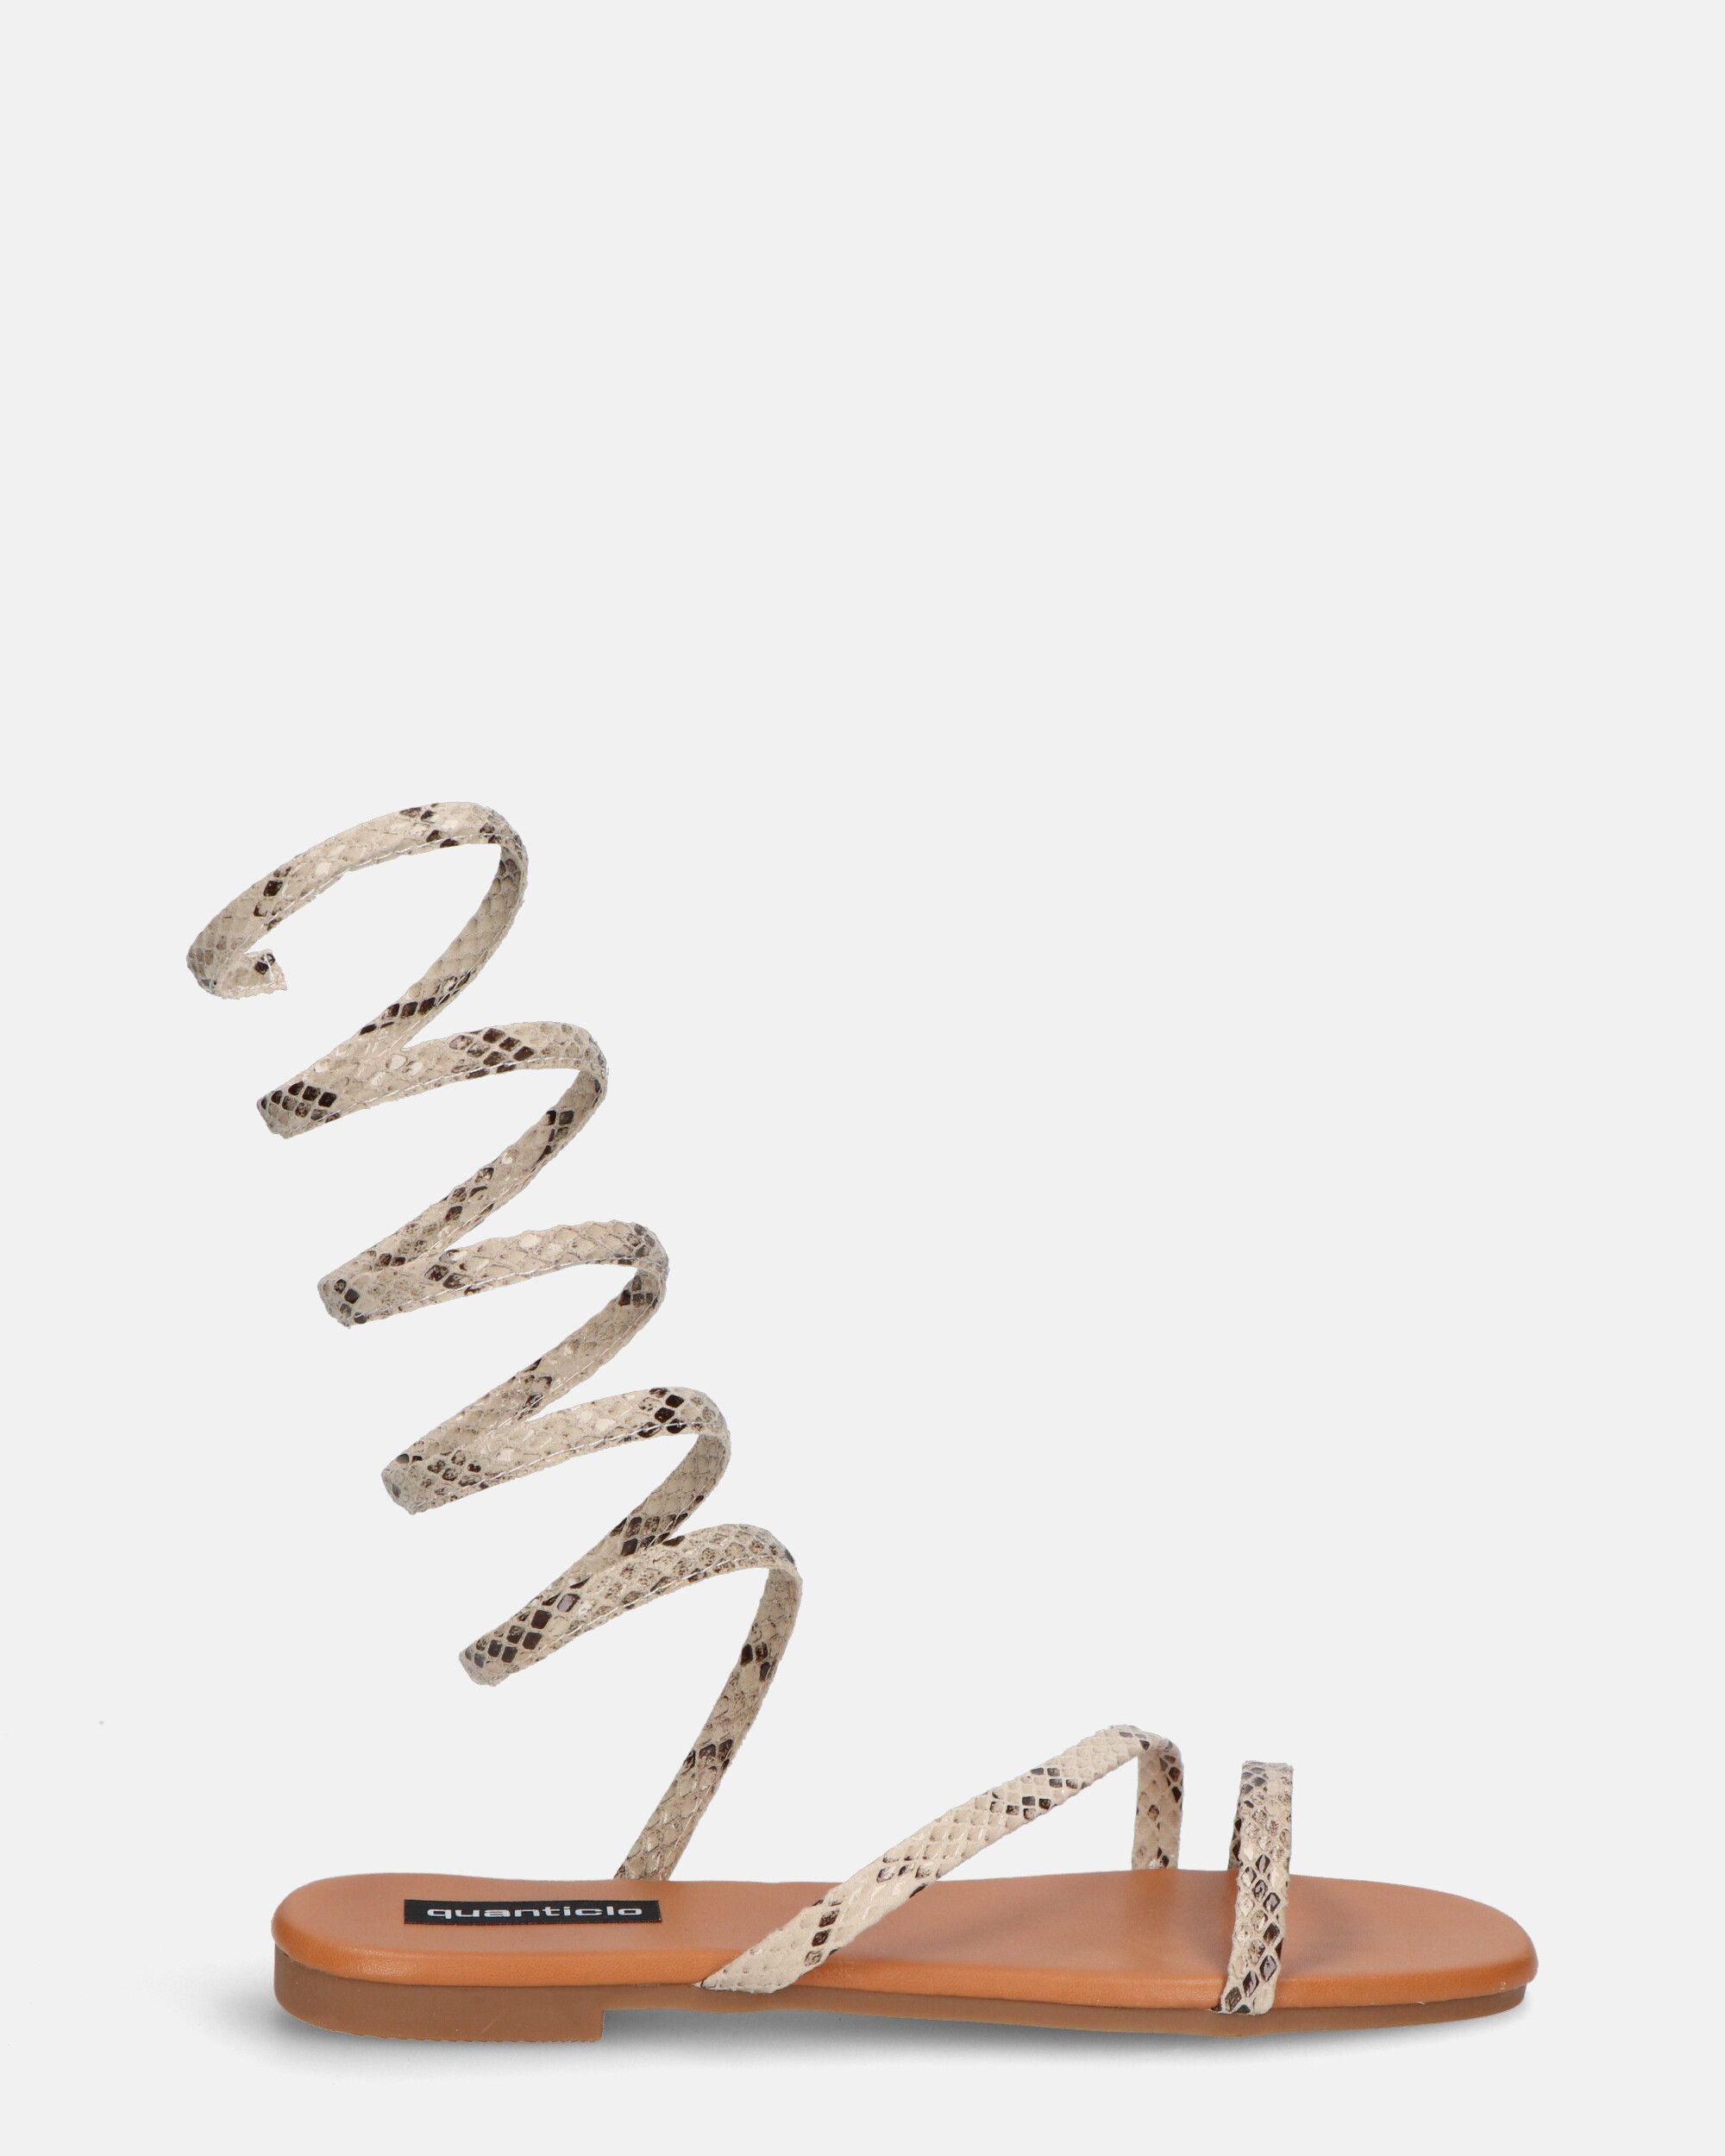 SIENNA - sandals with brown sole and python spiral